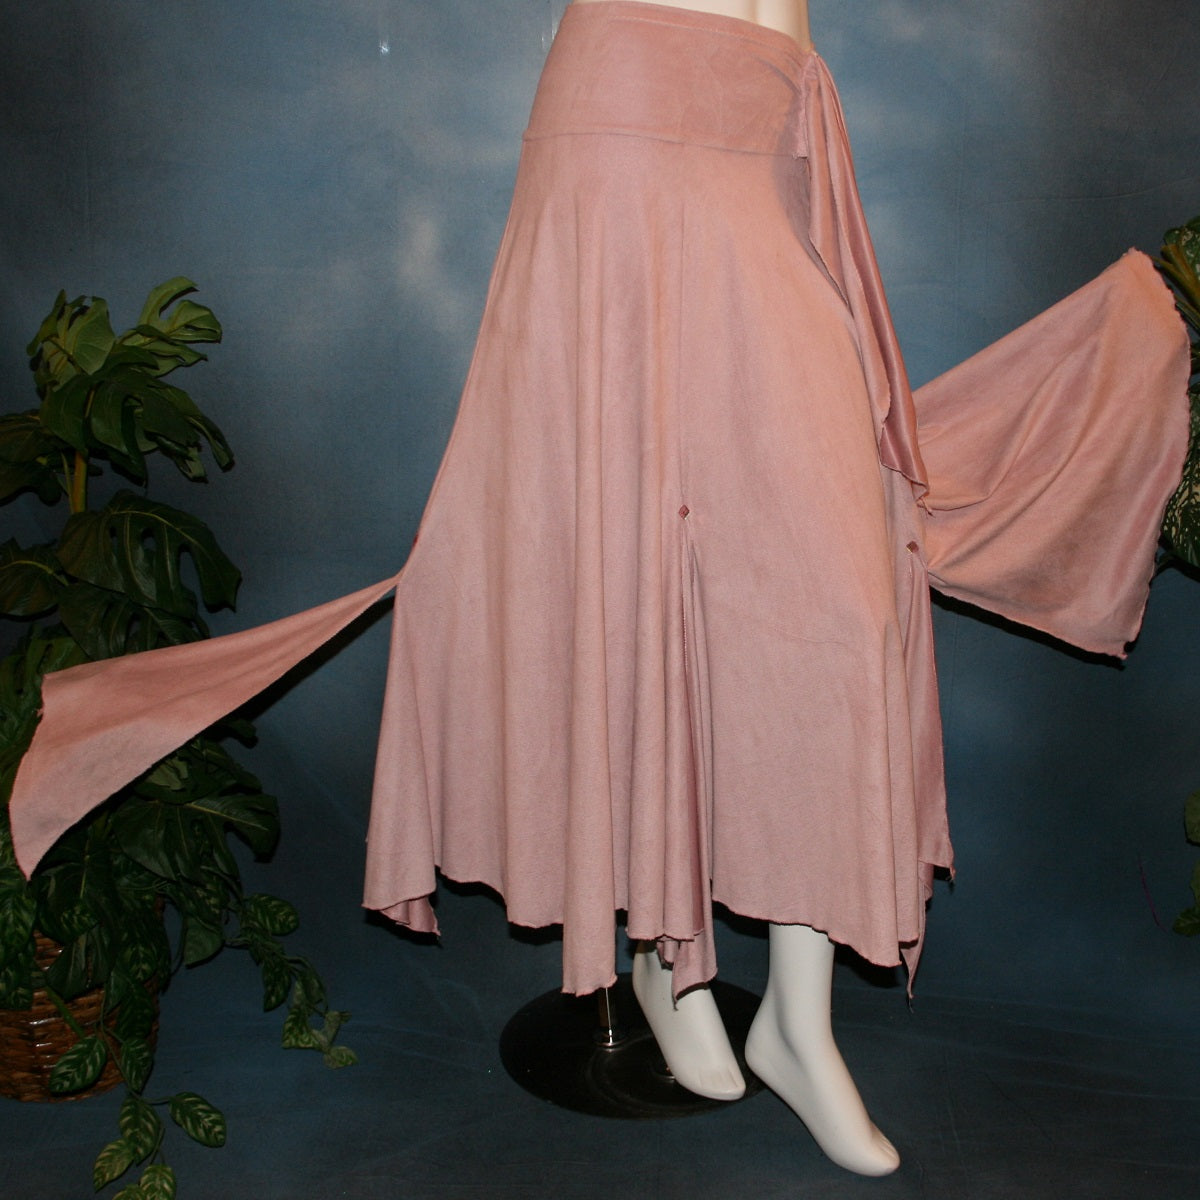 flared view of Lovely light rose dance skirt created of slightly stretchable suede cloth featuring a wide waist sash that flares out to several panels, with slits that have smaller floating panels with a rose colored acrylic gem at each.